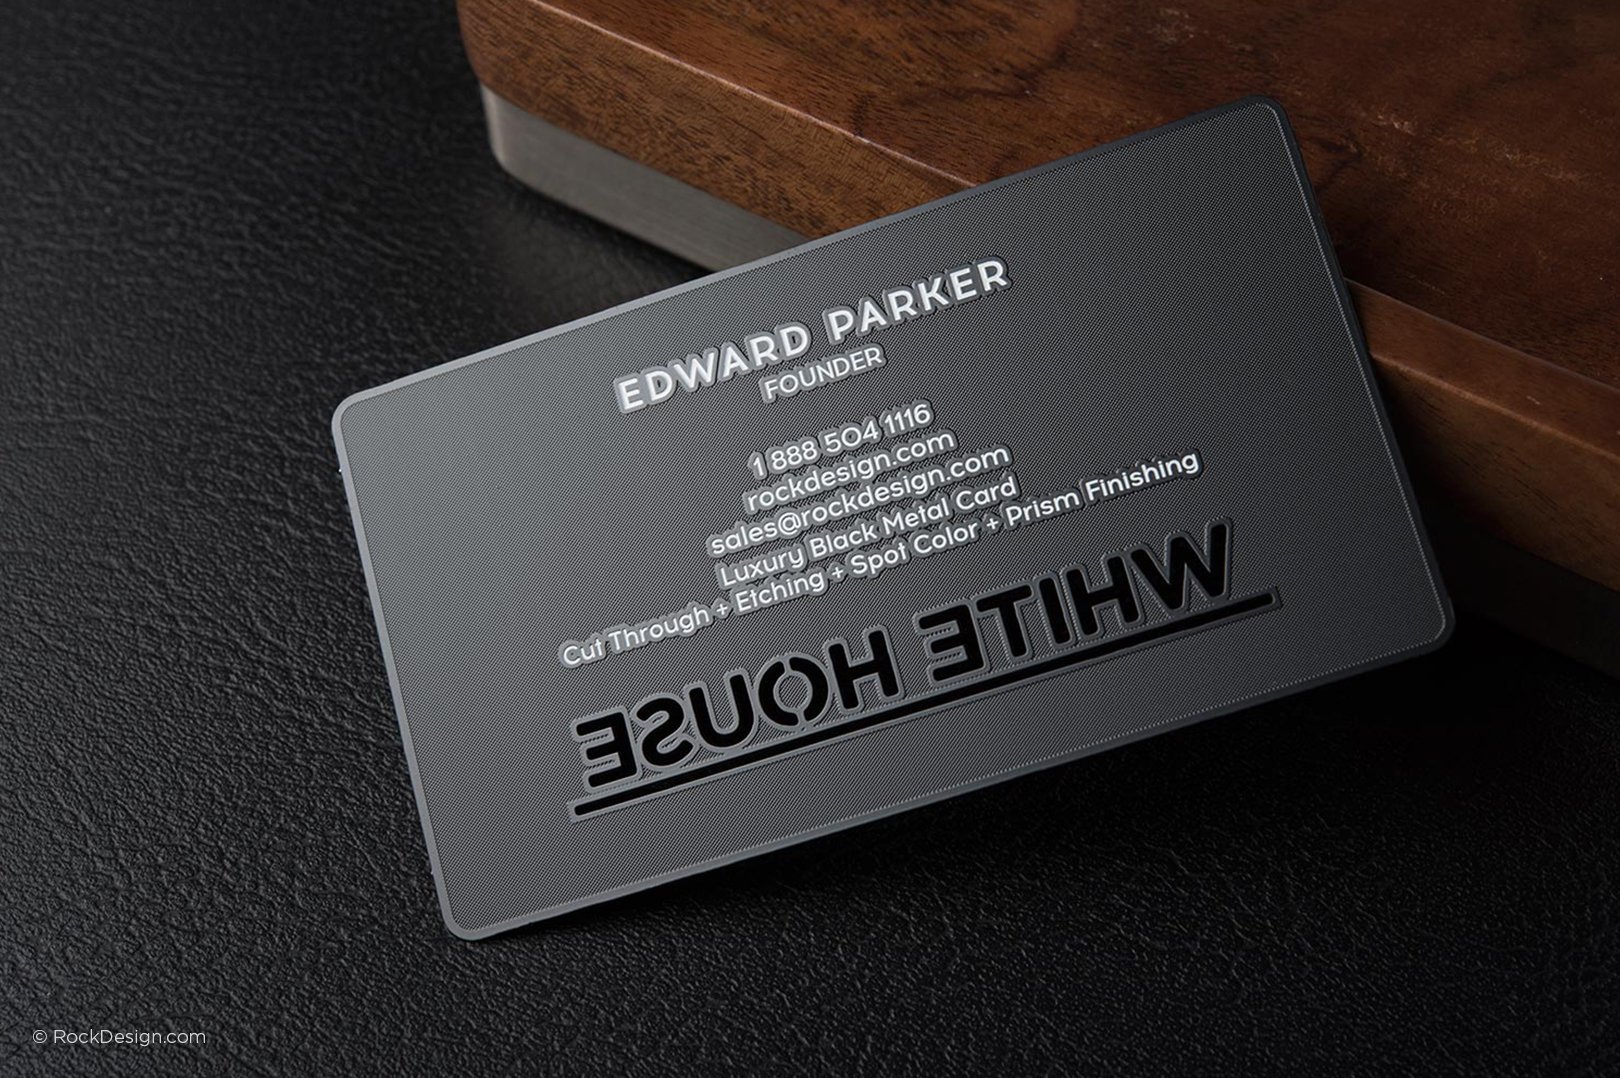 Metalux Black Metal Business Cards | Multi Color Print | Membership Cards |  VIP Cards | Gift Cards | Special Events